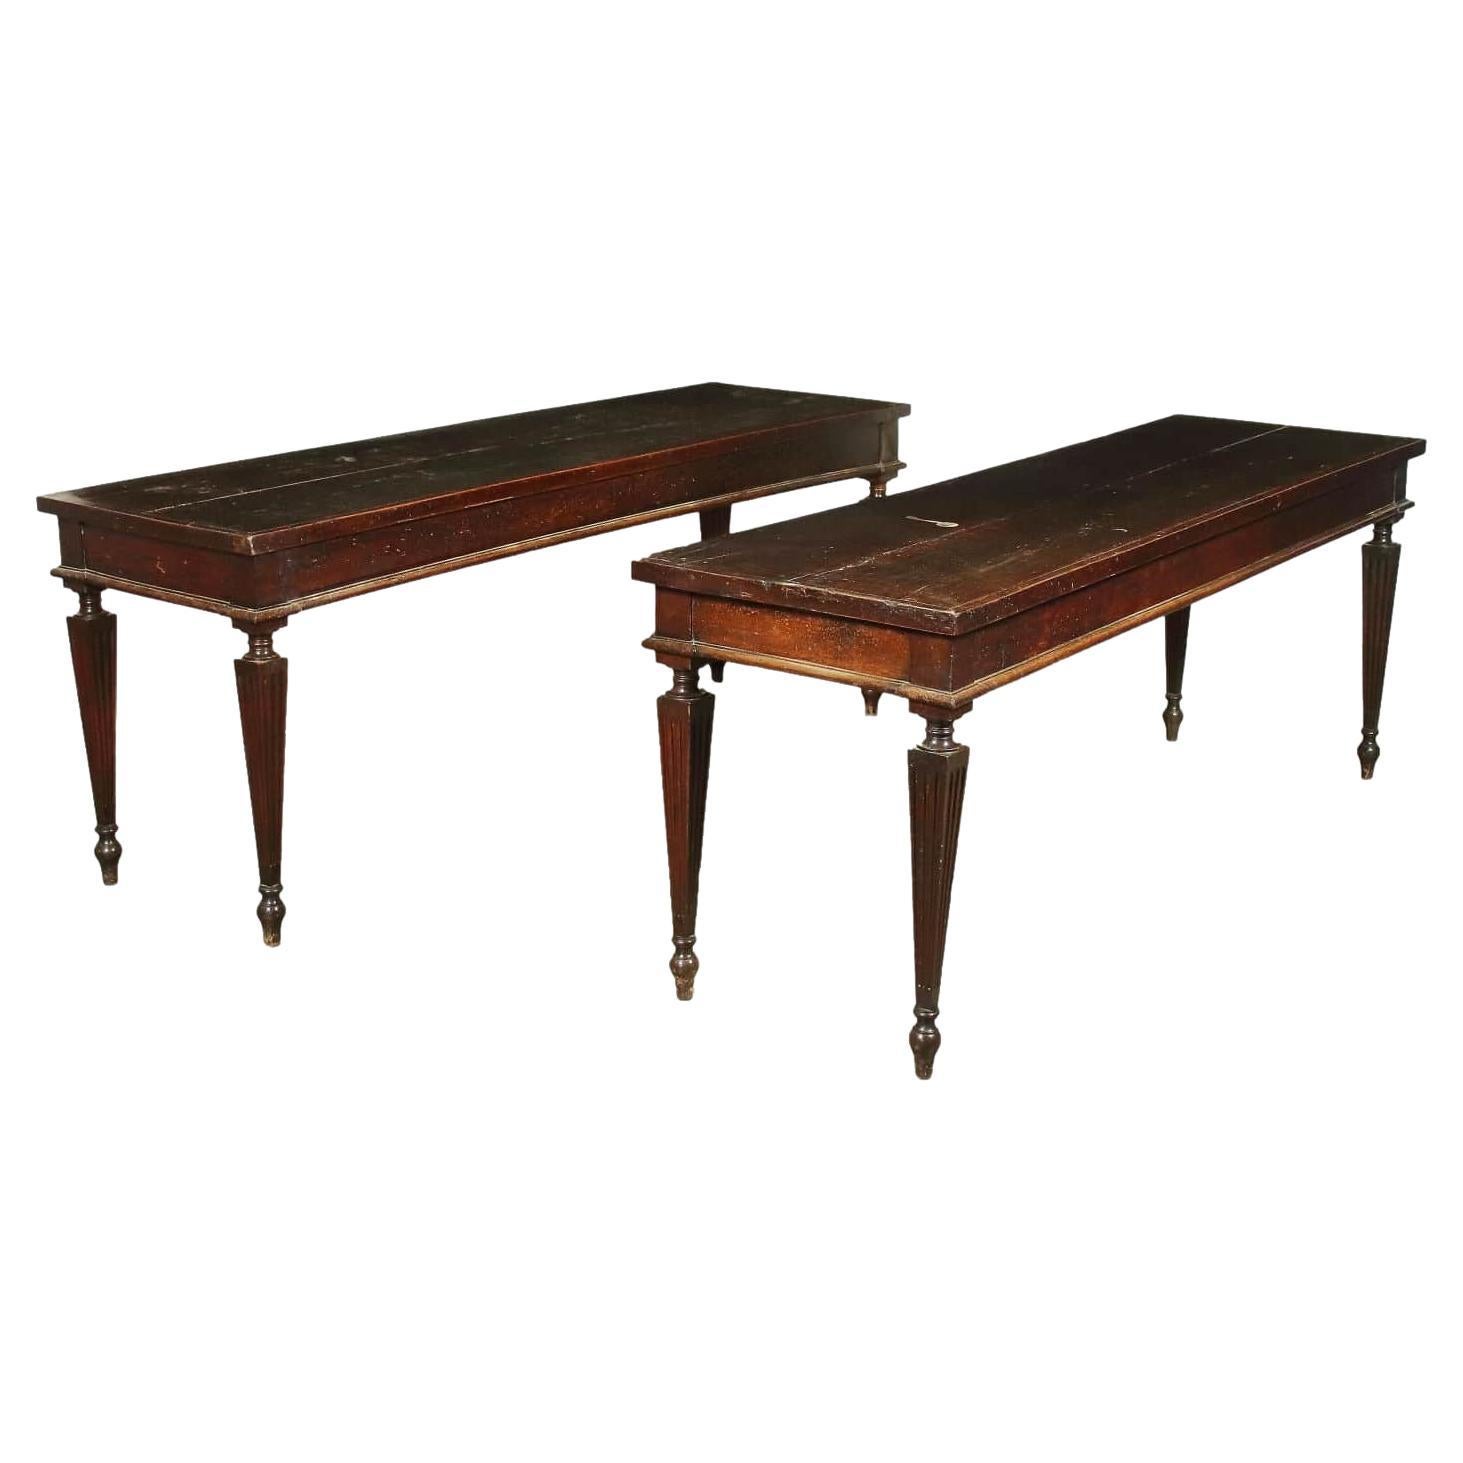 Pair of Consoles Neoclassical Walnut Piacenza Italy Second Half 1700 For Sale